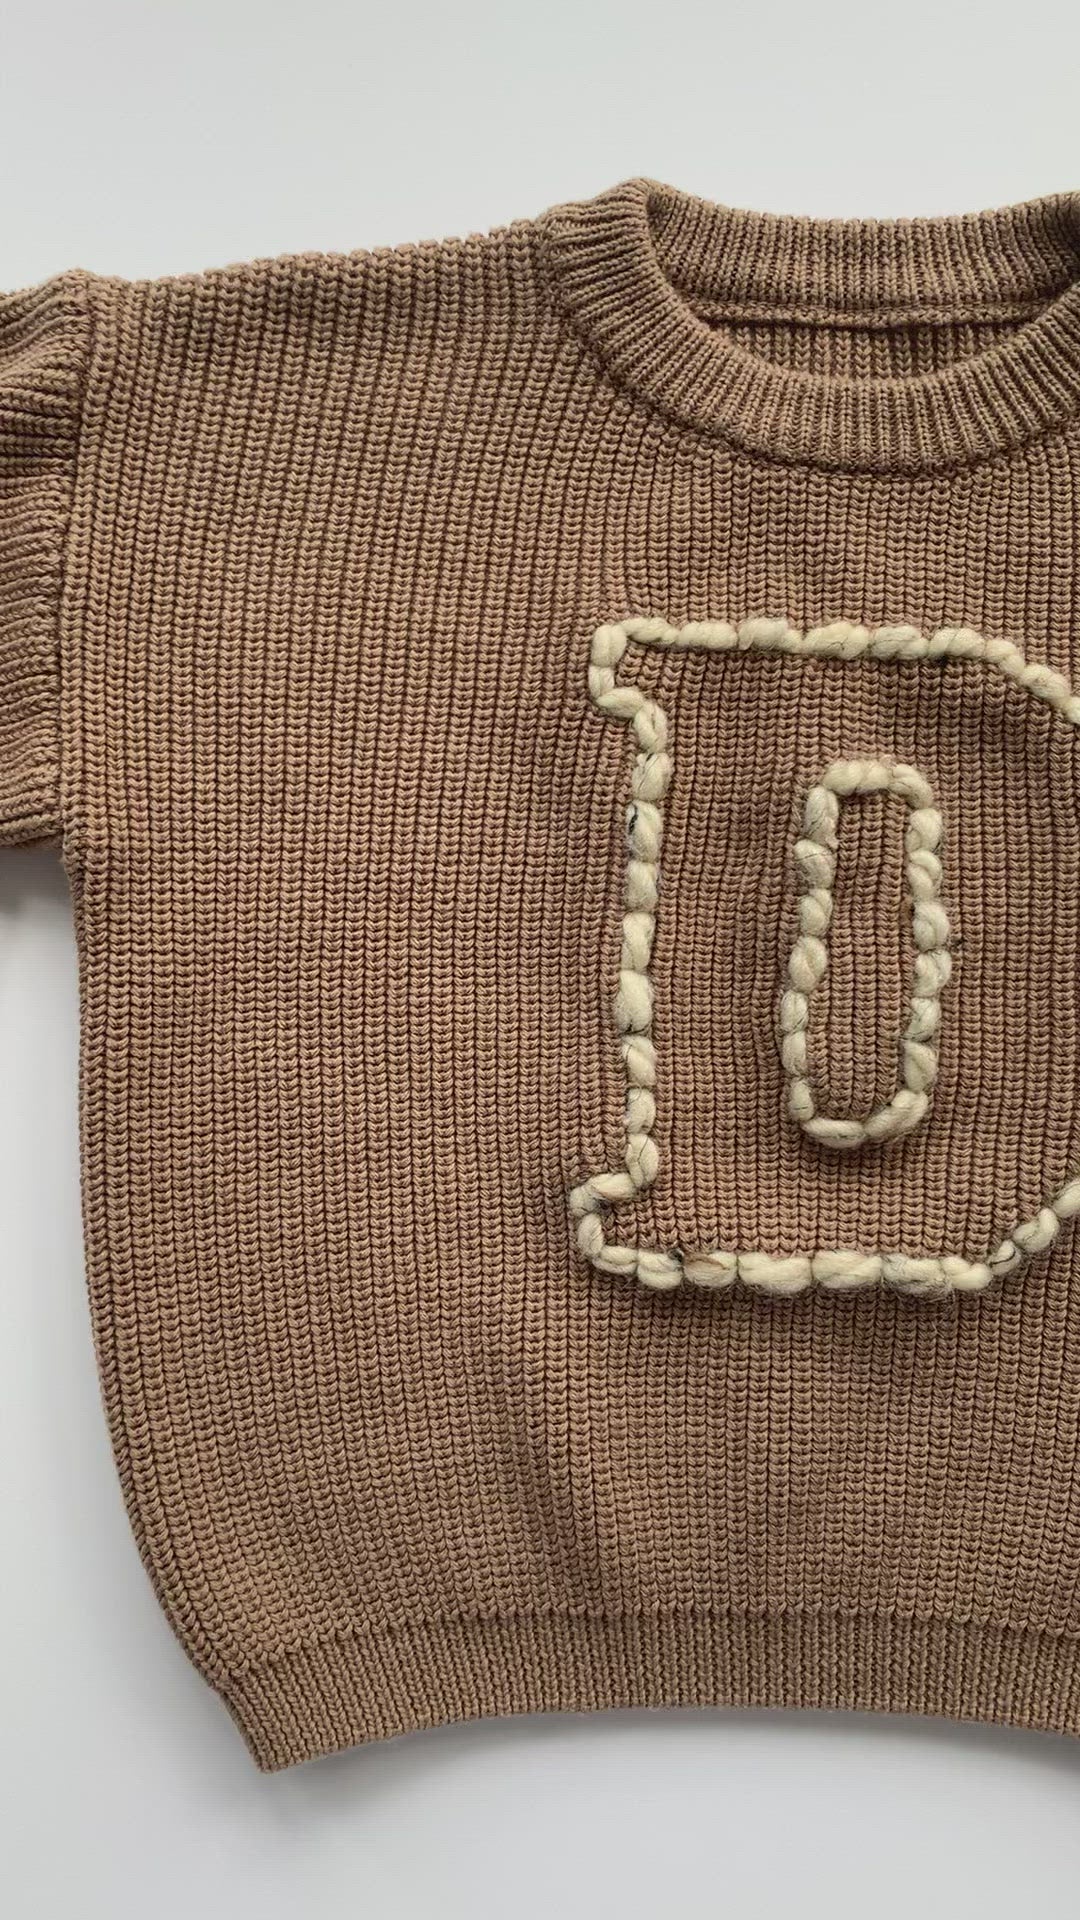 Hand Embroidered Varsity Letter Sweater